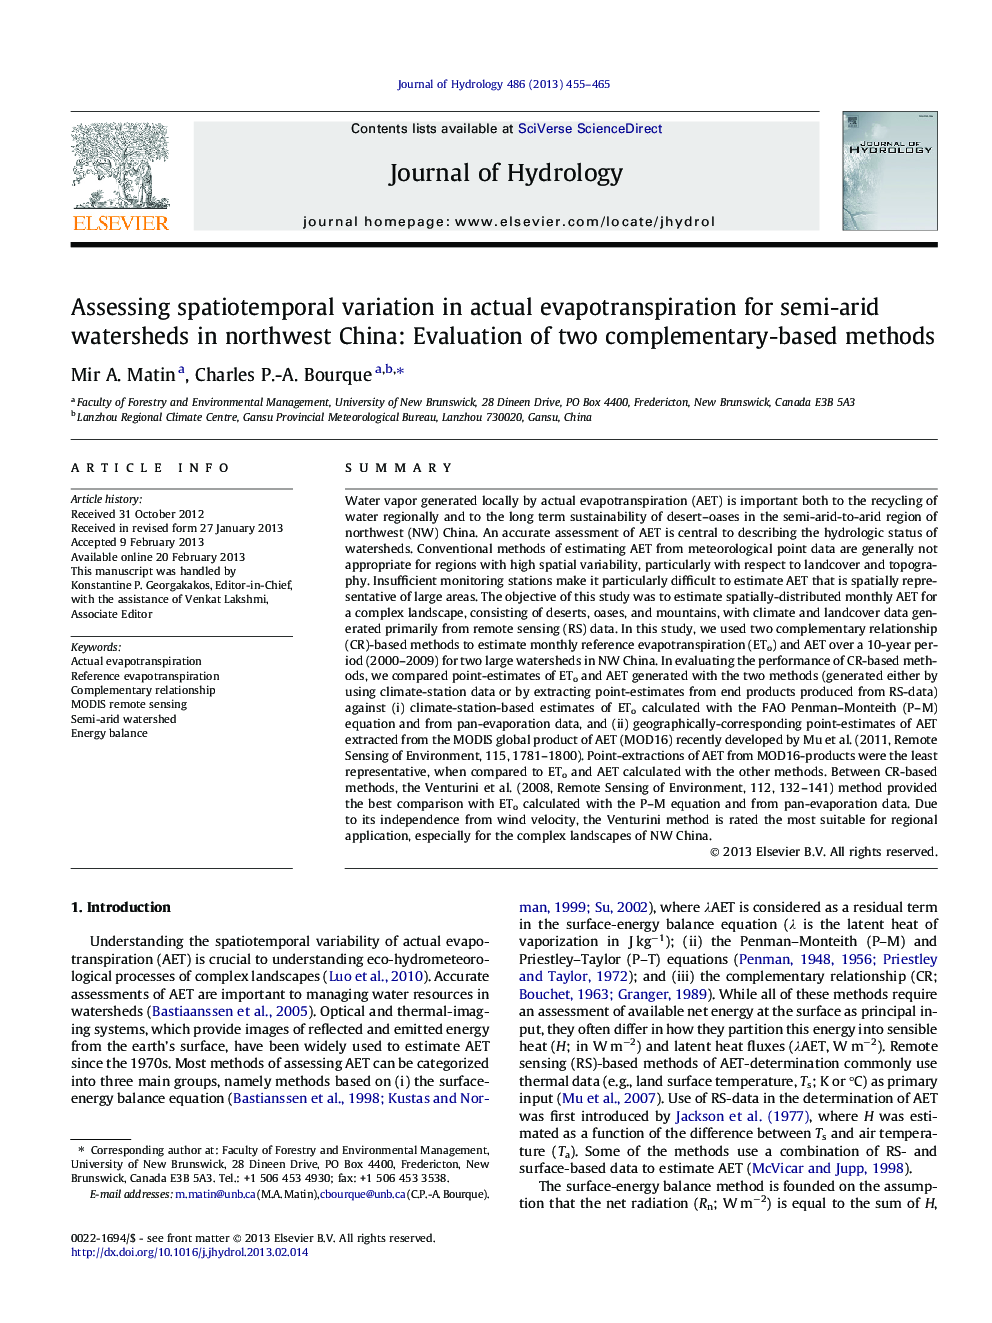 Assessing spatiotemporal variation in actual evapotranspiration for semi-arid watersheds in northwest China: Evaluation of two complementary-based methods